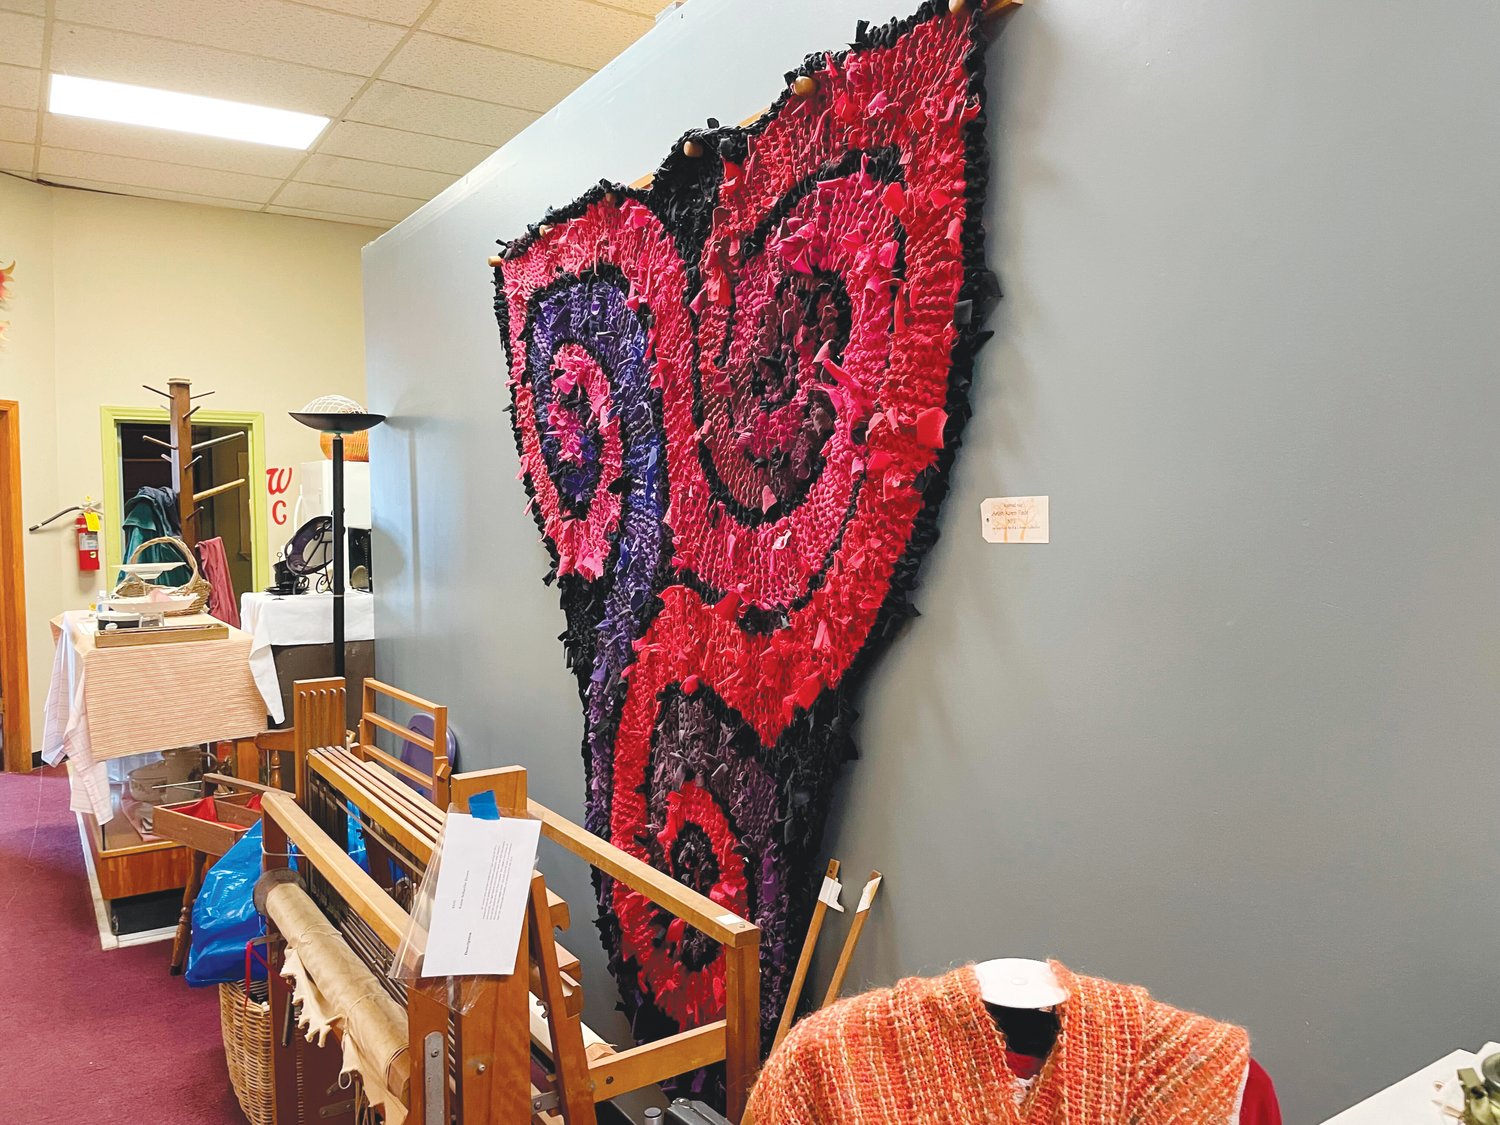 Hand-crafted goods and tools such as baskets and yarn lay on display at Twin Birch & Teasel on Monday in Siler City. The shop in downtown Siler City has specialized in making birchwood fiber art tools since 1982.